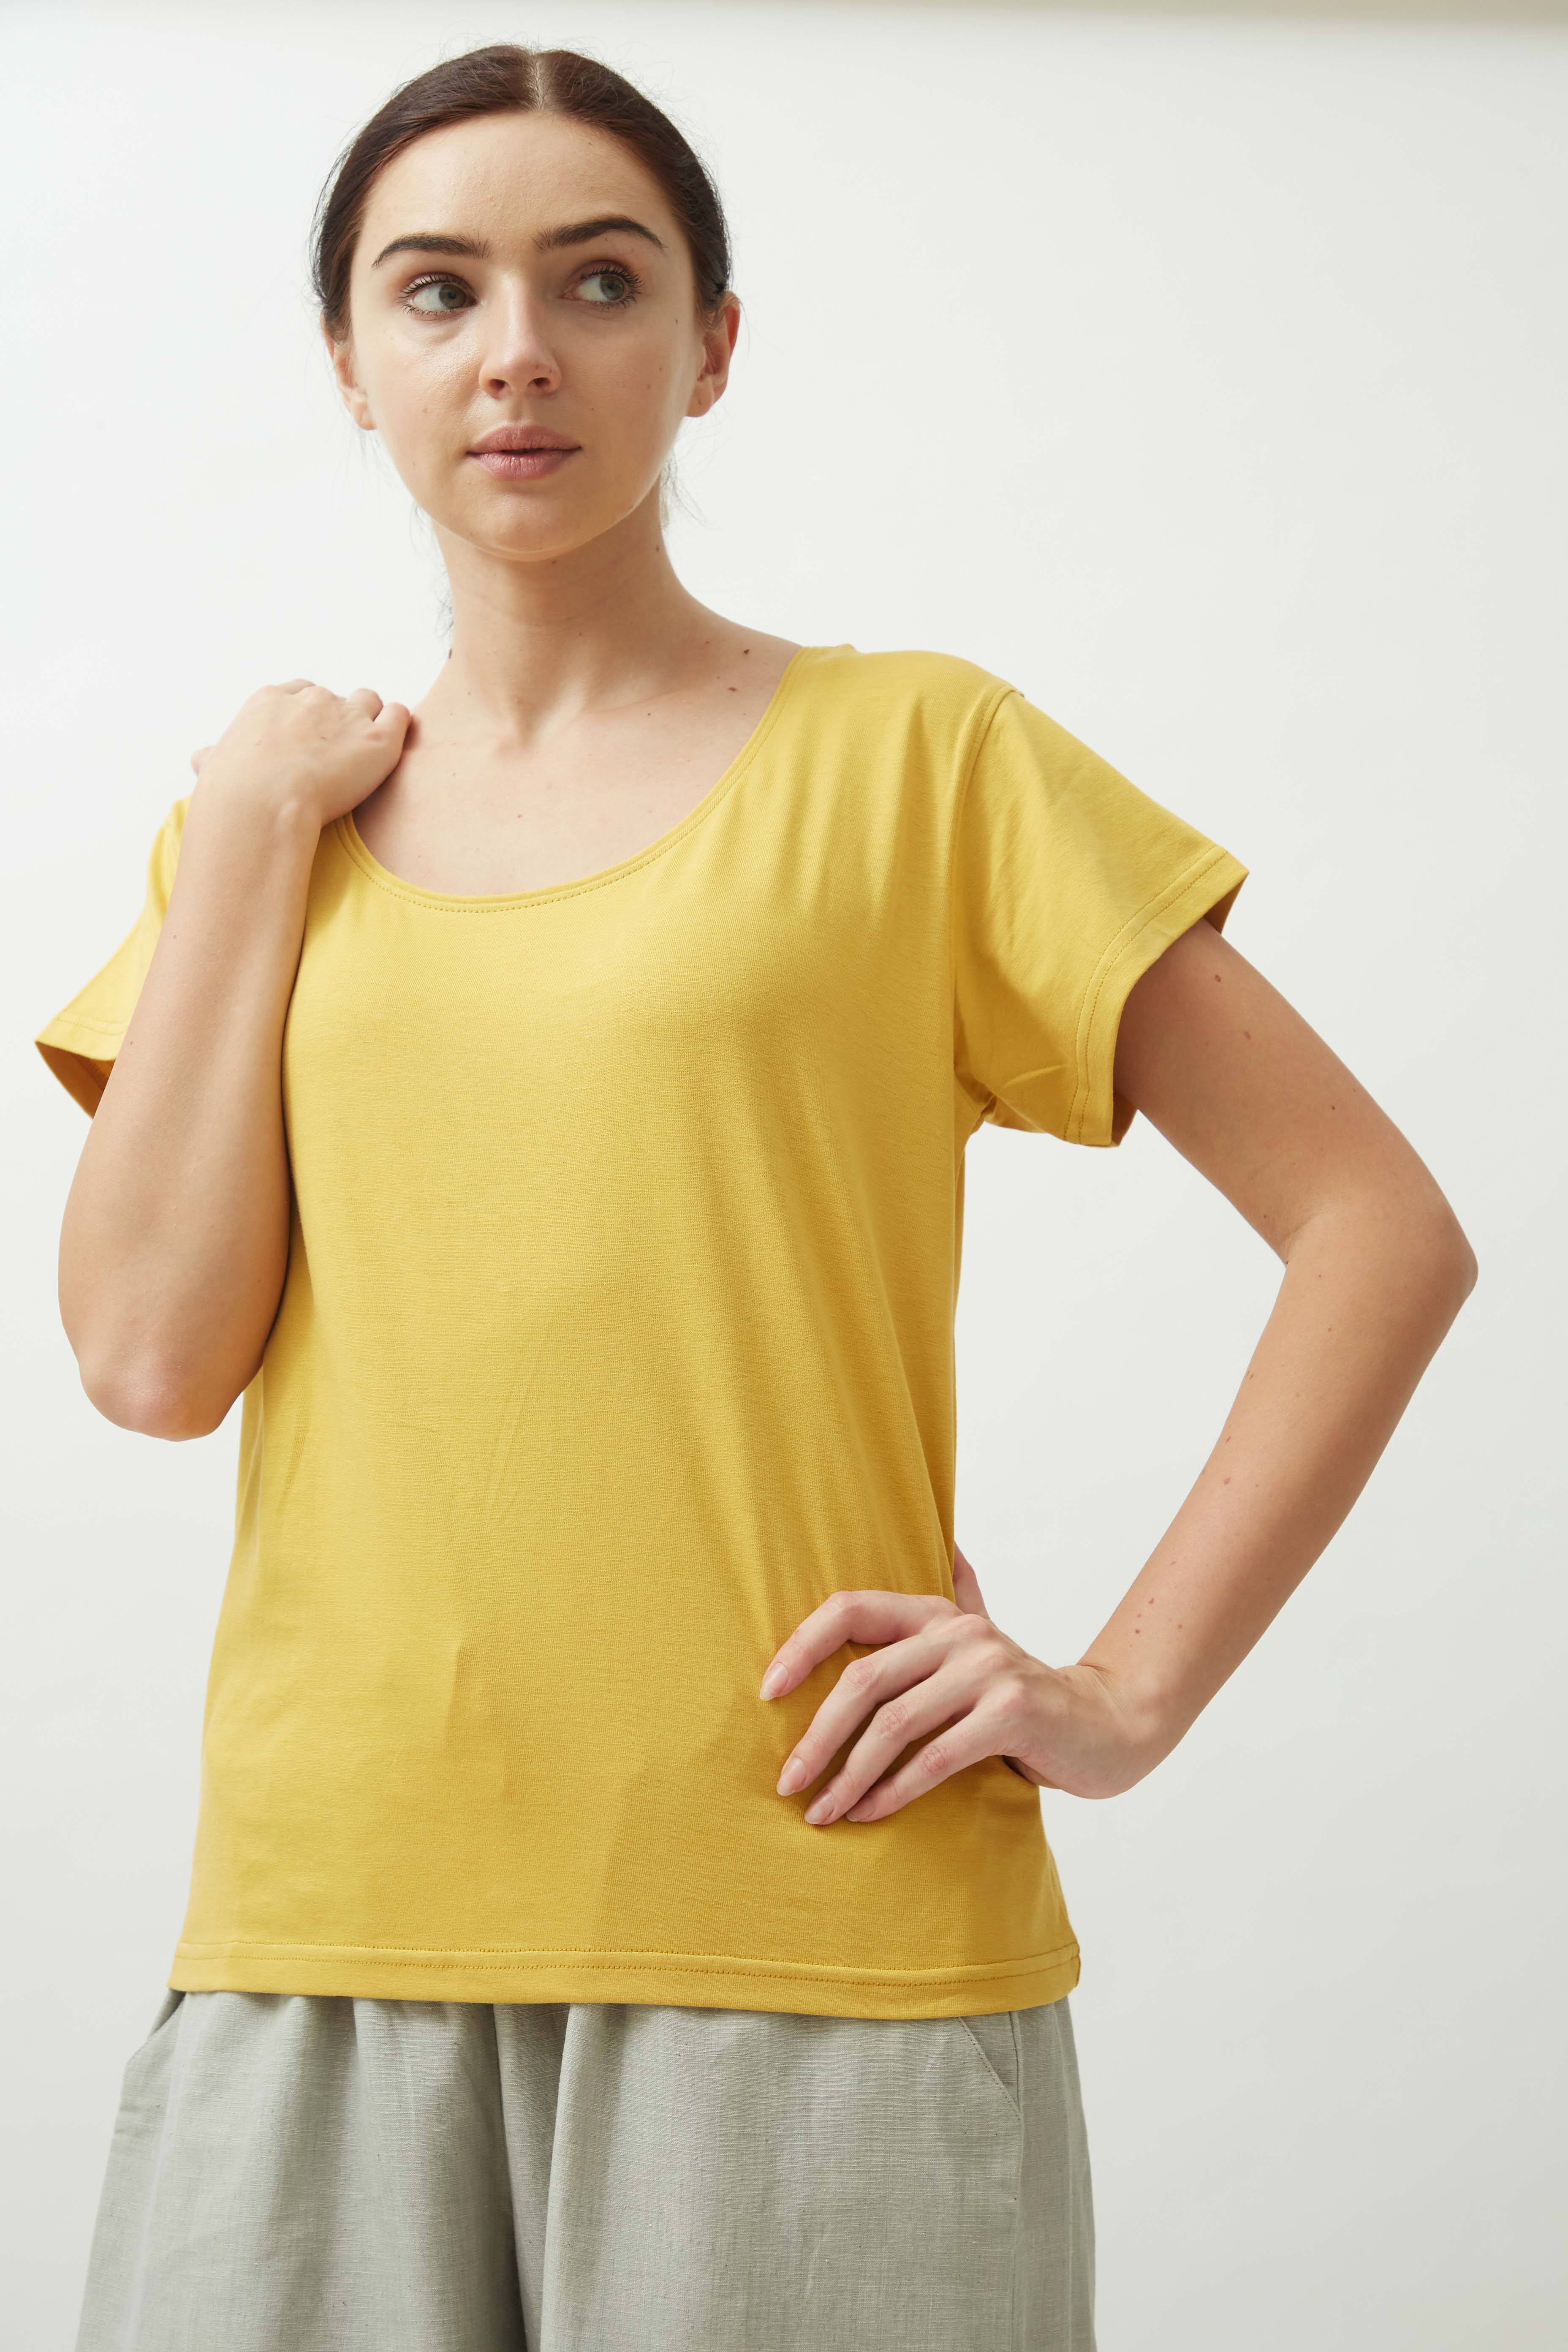 Saltpetre womens 100% organic cotton ola parabola half sleeve shirt with round neck and loose ankle length pants with pockets for lounge and casual wear. In Banana yellow.